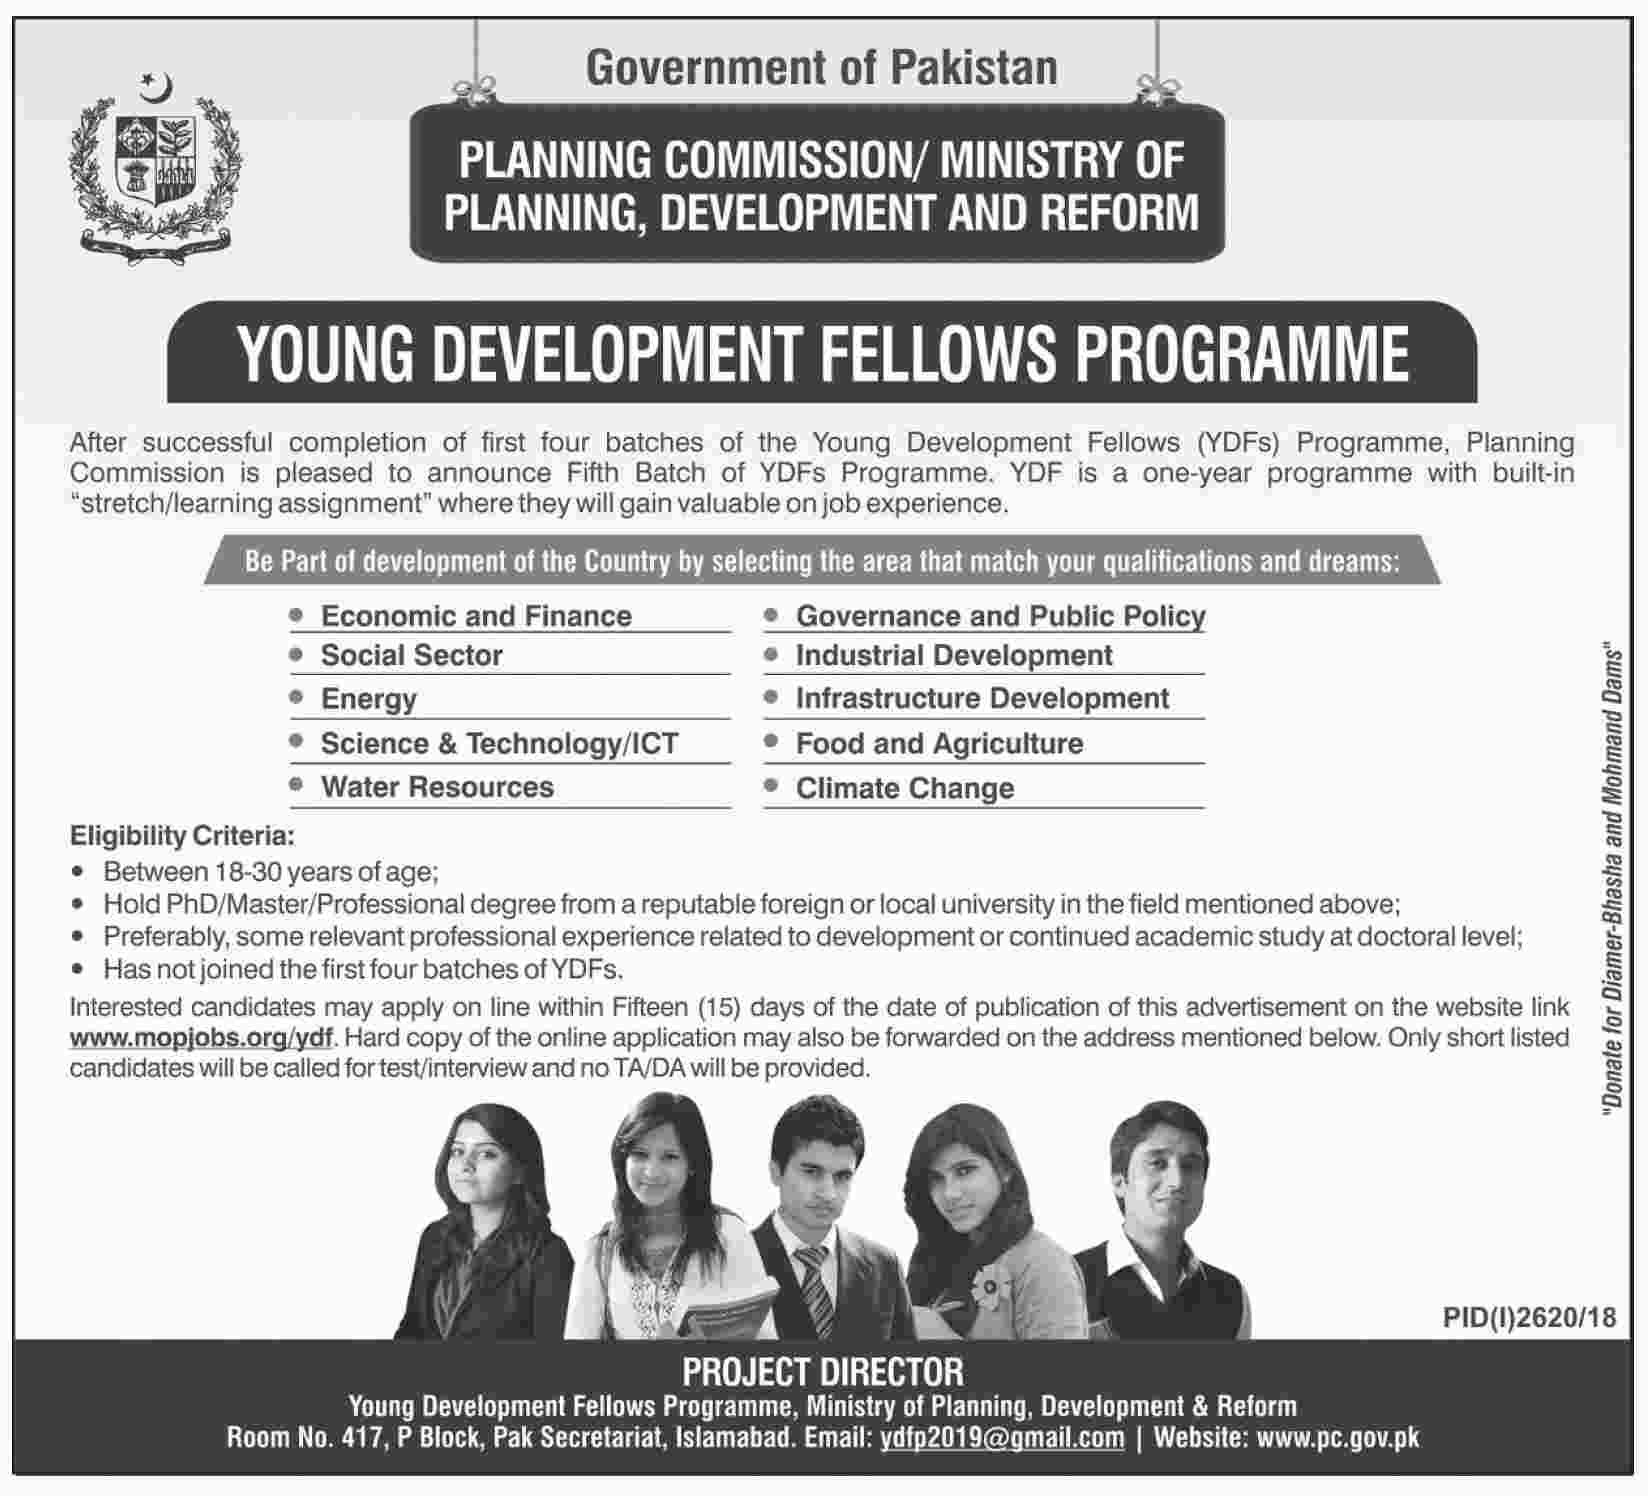 Young Development Fellows (Fifth Batch of YDFs Programme)  - Planning Commission/ Ministry of Planning